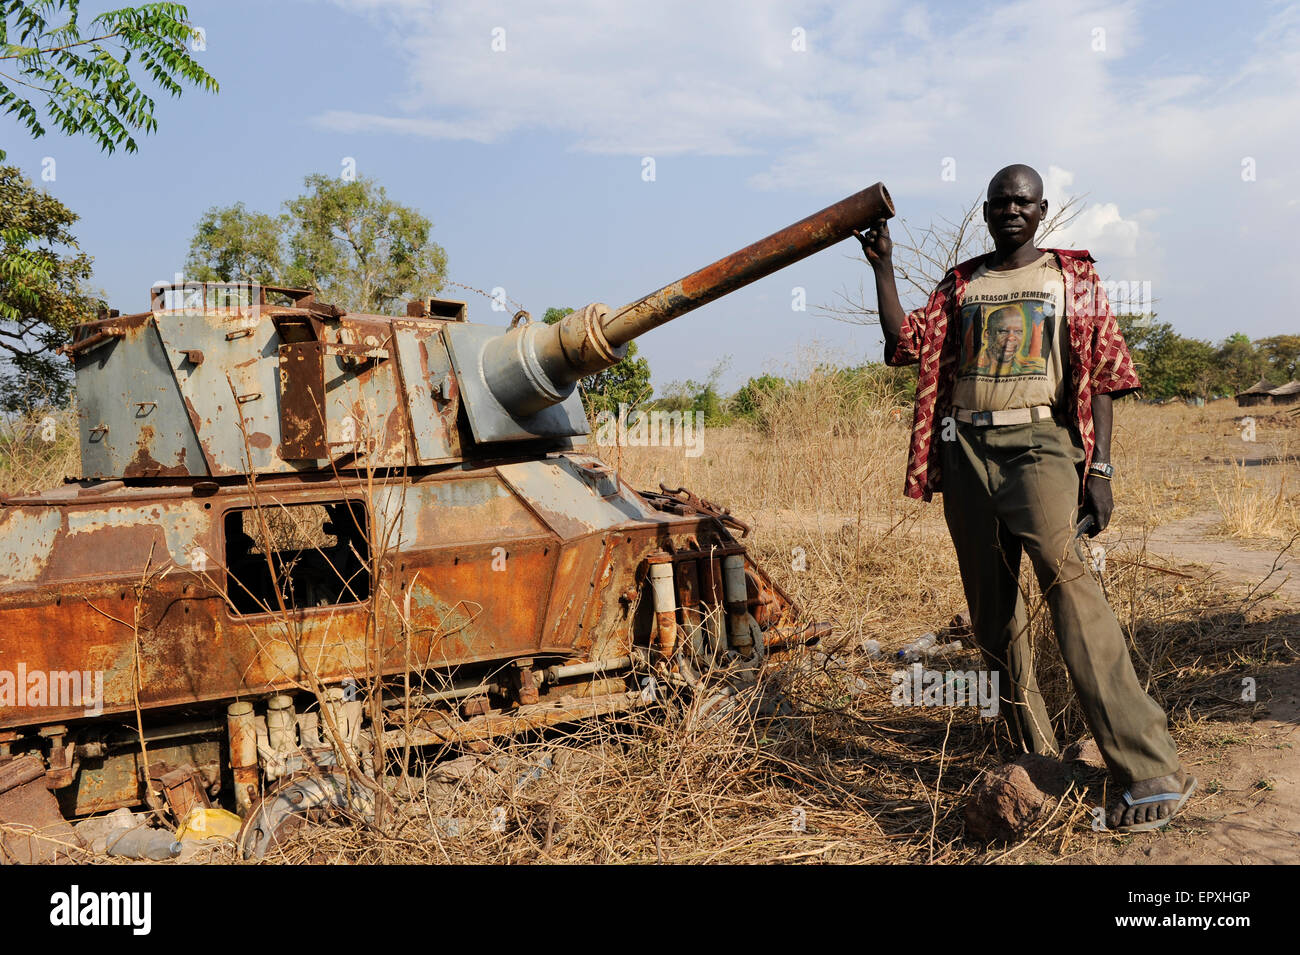 South Sudan, Lakes state, Rumbek, wreck of six-wheeled armoured car FV601 Saladin, manufactured by Alvis factory in Coventry, UK, the tank was captured by south-sudanese liberation army SLPA from the Sudanese Armed Forces SAF during Second Sudanese Civil War from 1983 to 2005, man with T-shirt with image of John Garang the former leader of SPLA and national hero today Stock Photo